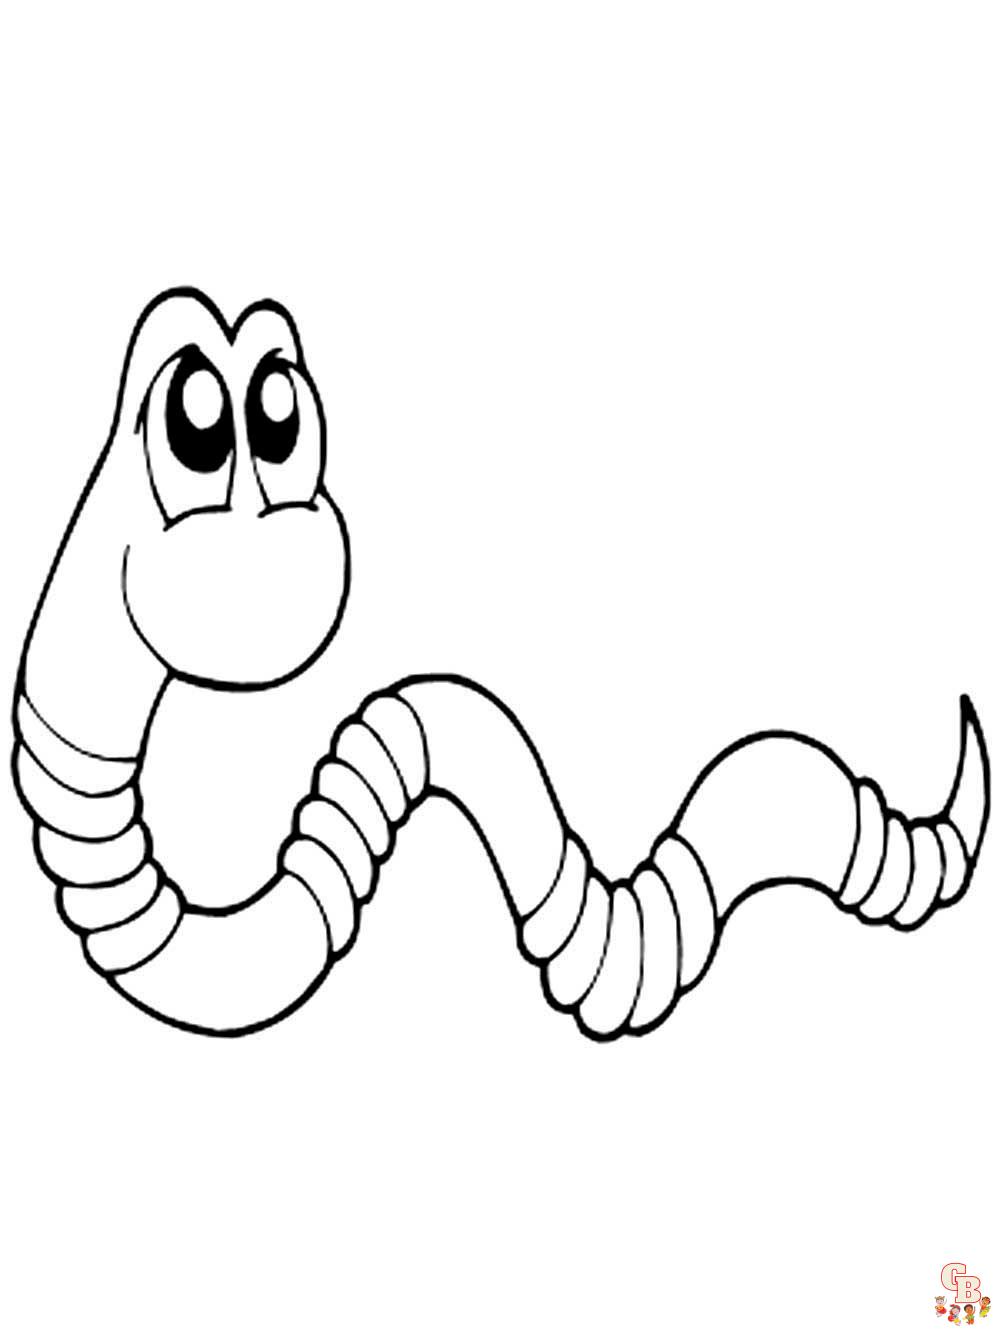 Worm Coloring Pages 15